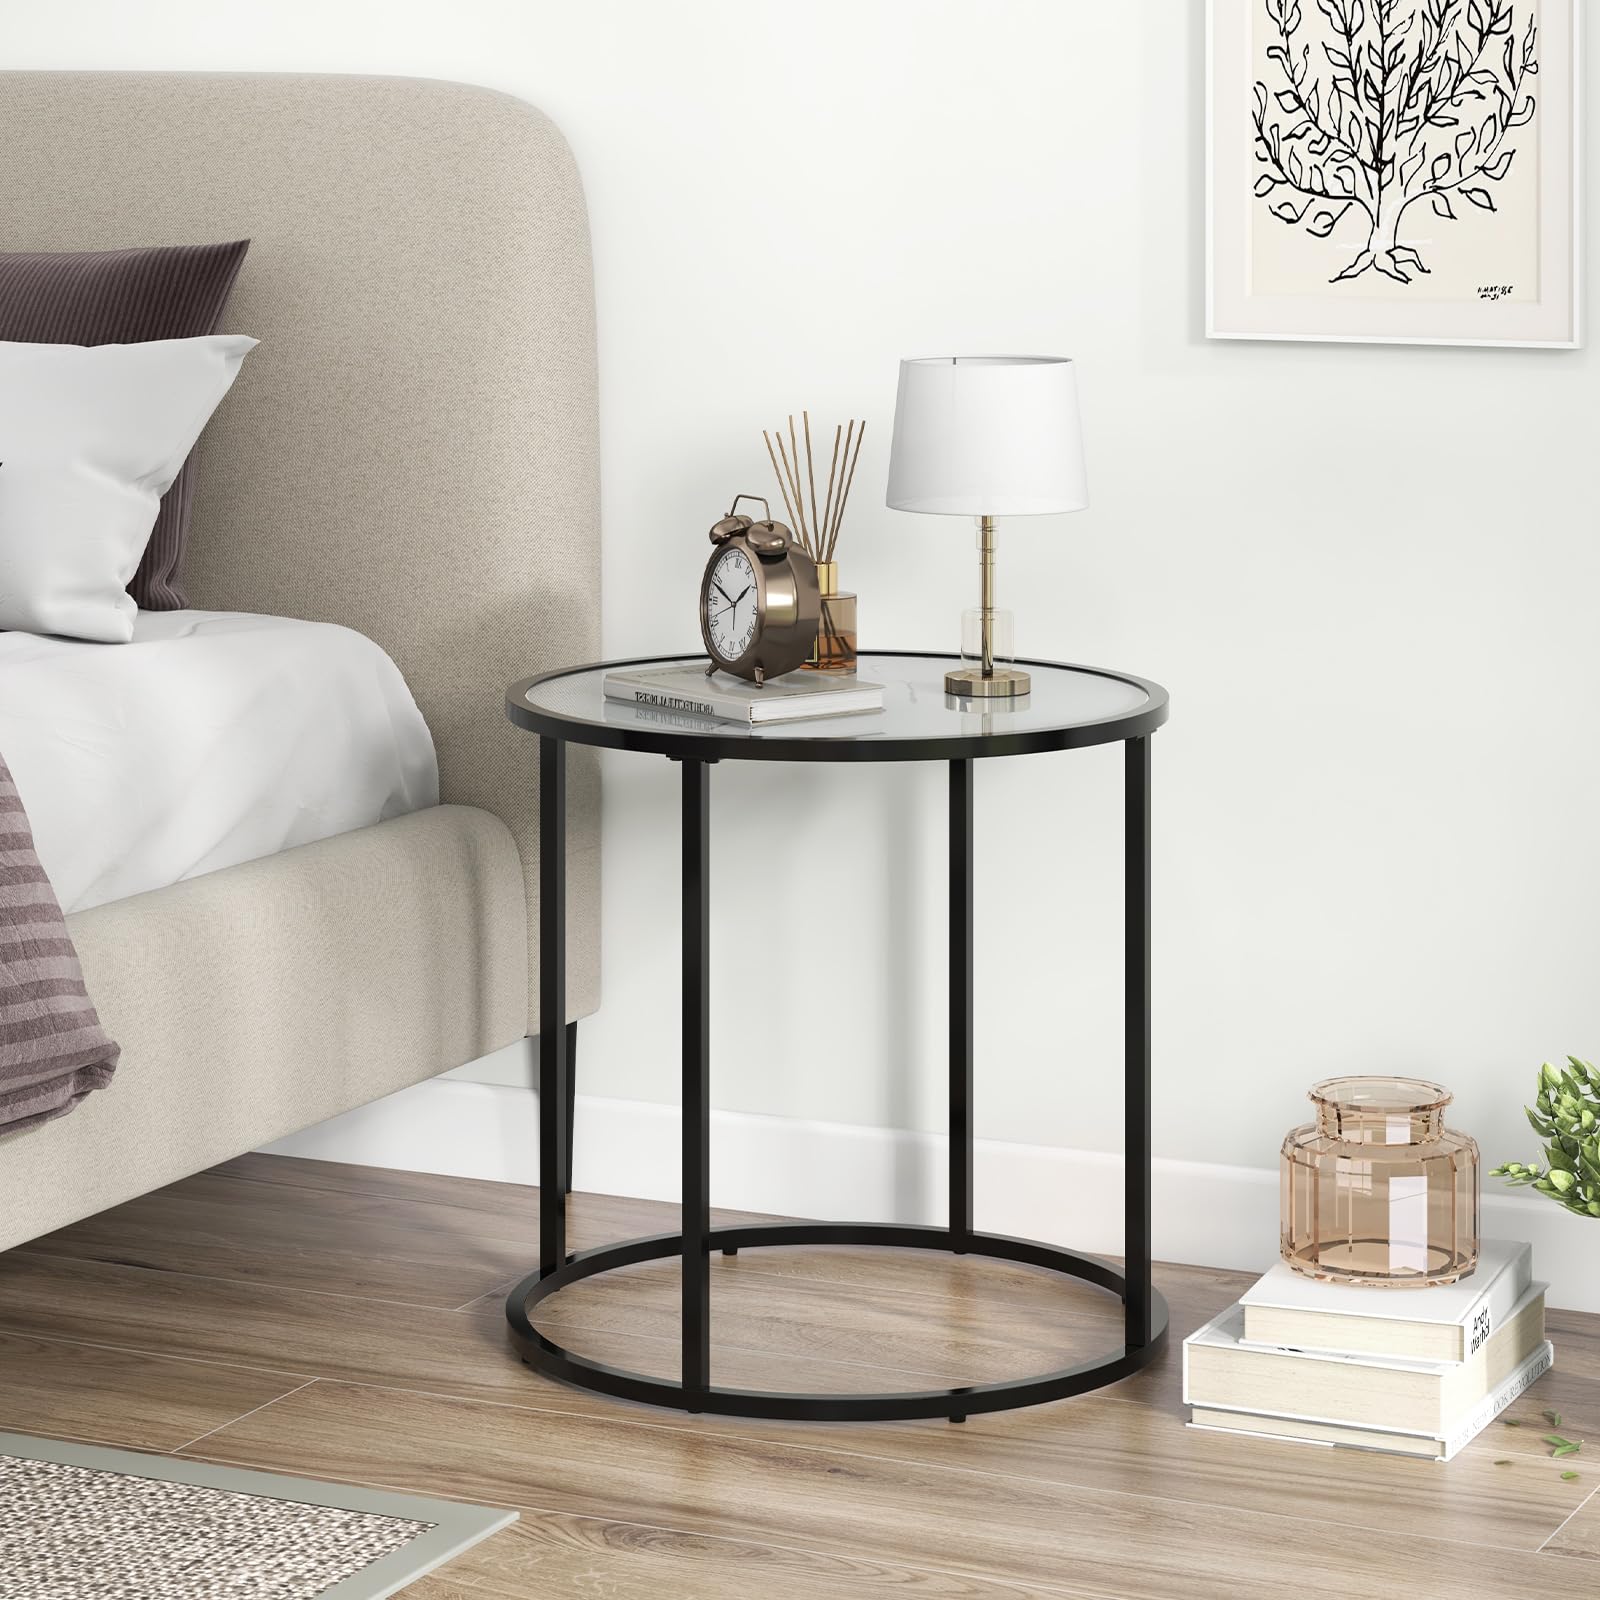 Giantex Round Side Table, Tempered Glass End Table with Metal Frame